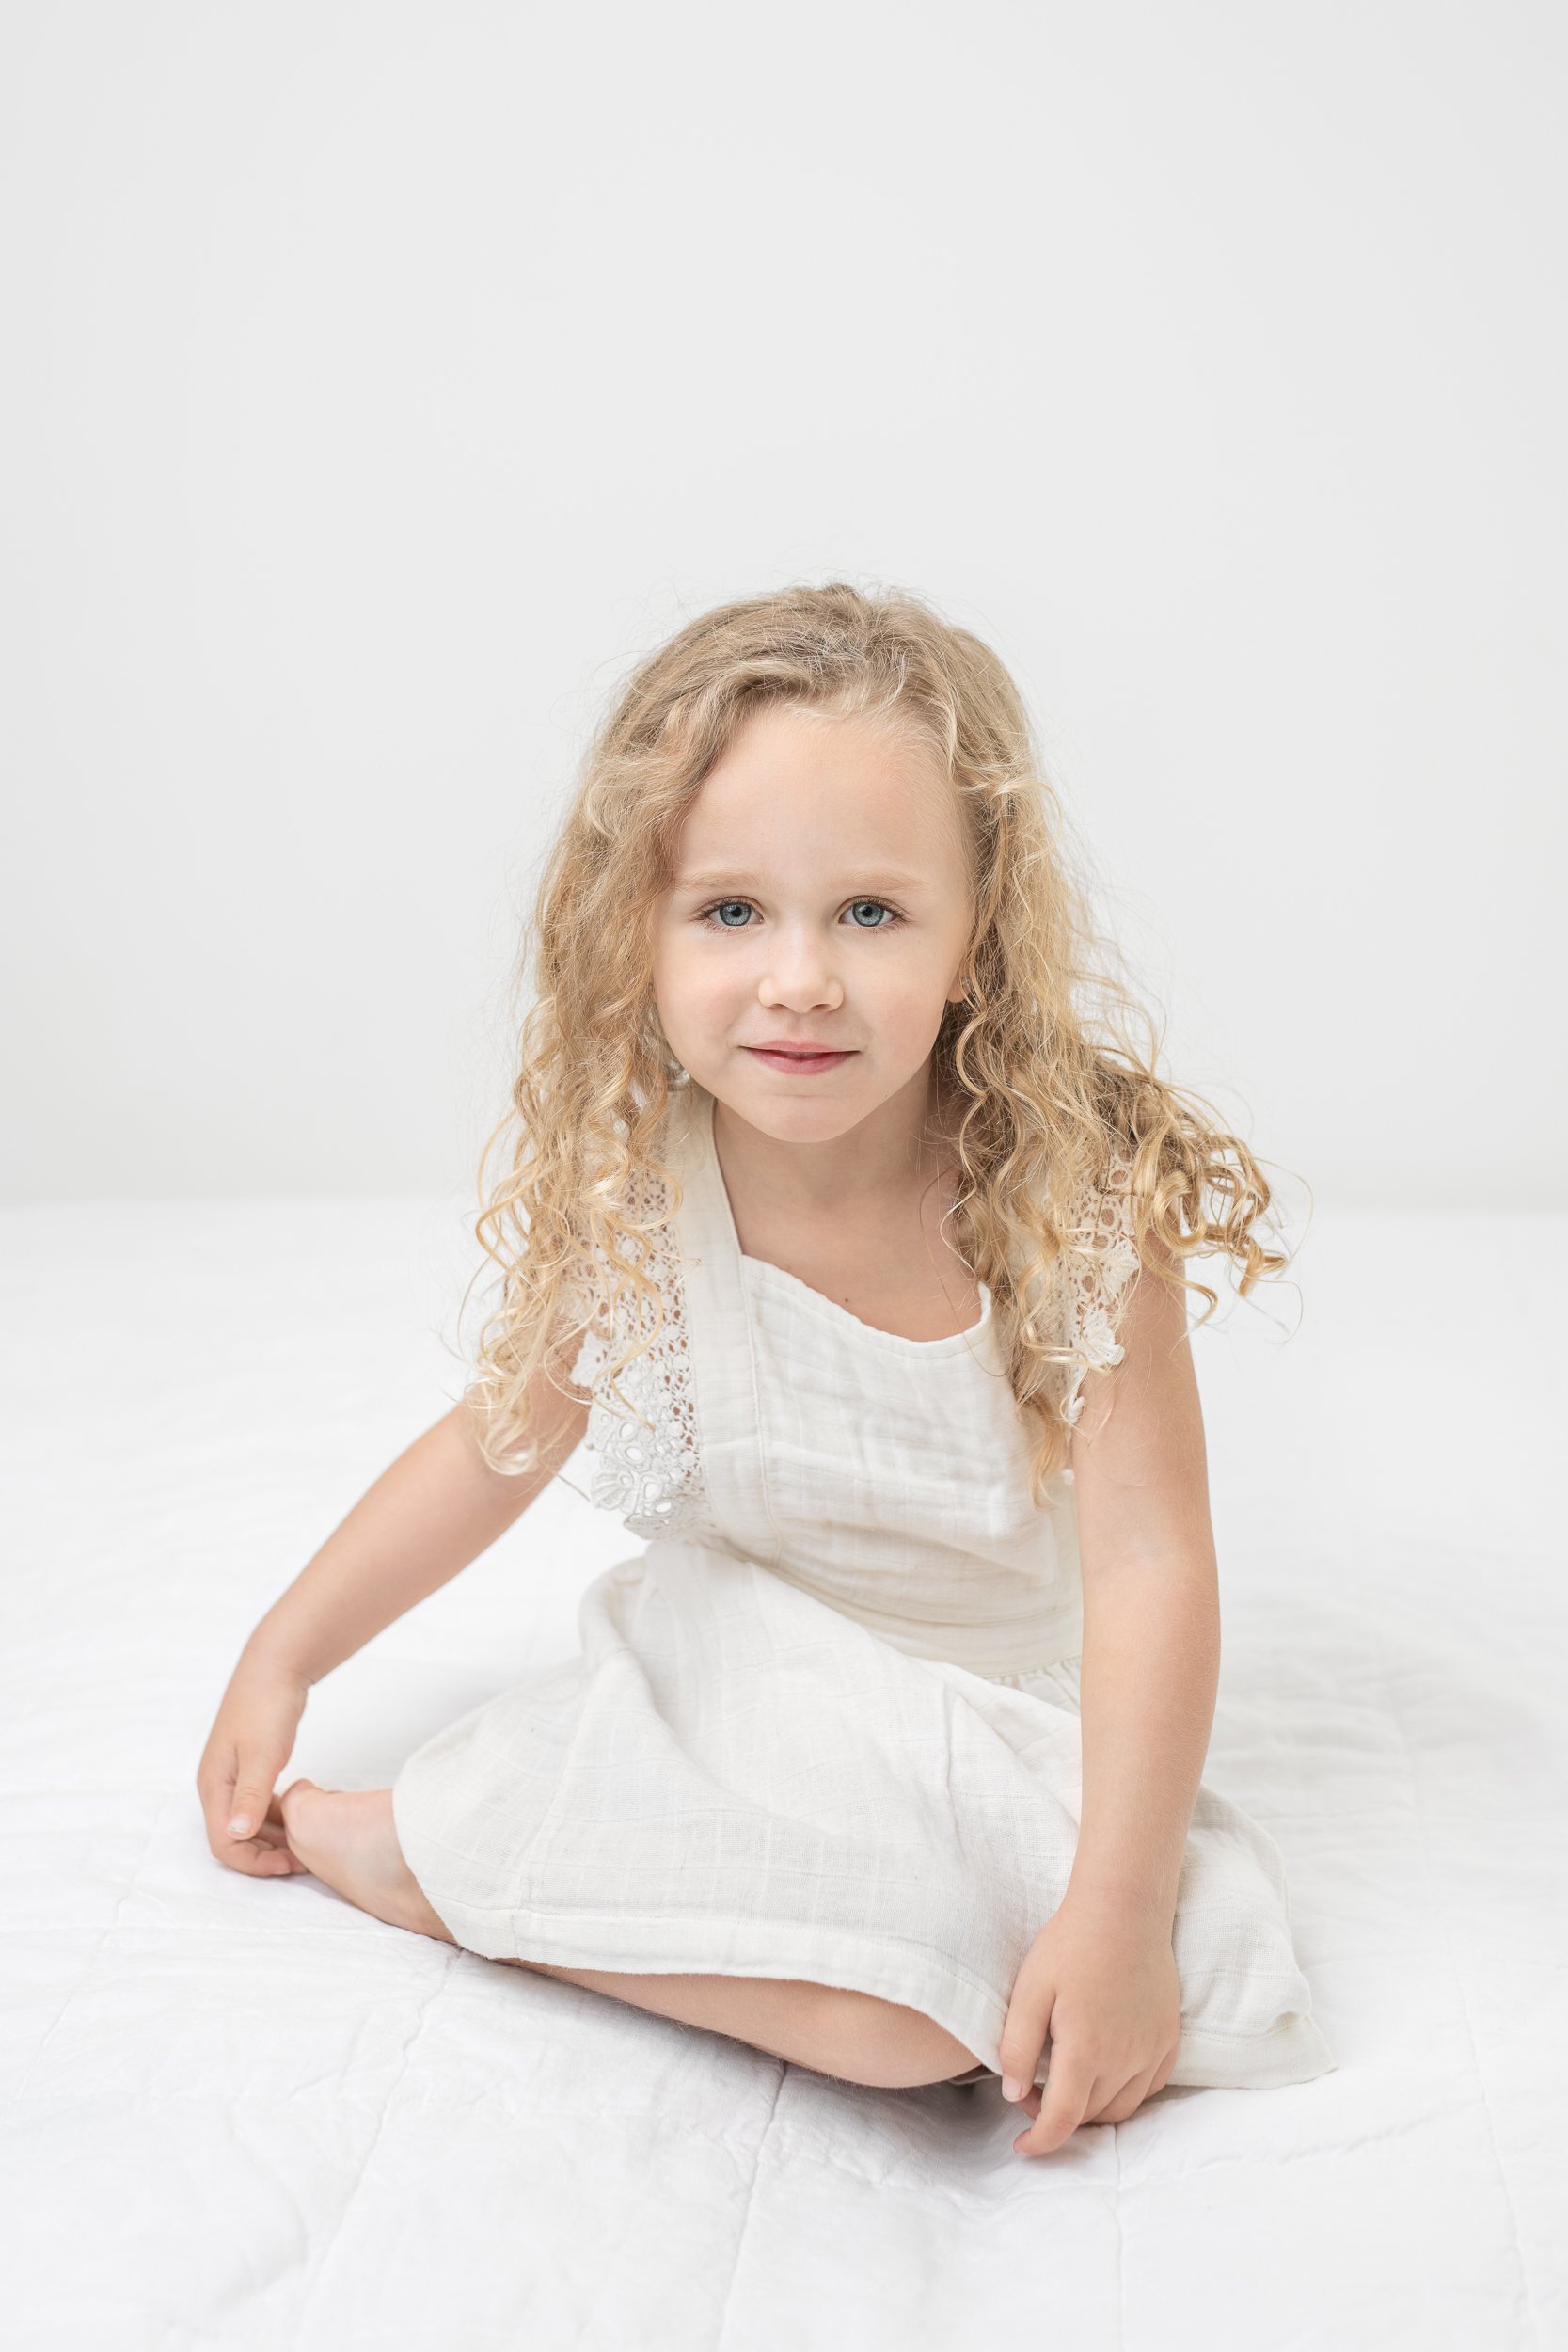  Blonde curly-haired little girl wearing a flutter sleeve white dress sitting on white bedding in a studio by Nicole Hawkins Photography a New Jersey photographer. little girl with blonde hair little girl studio session big sister girl outfit inspira